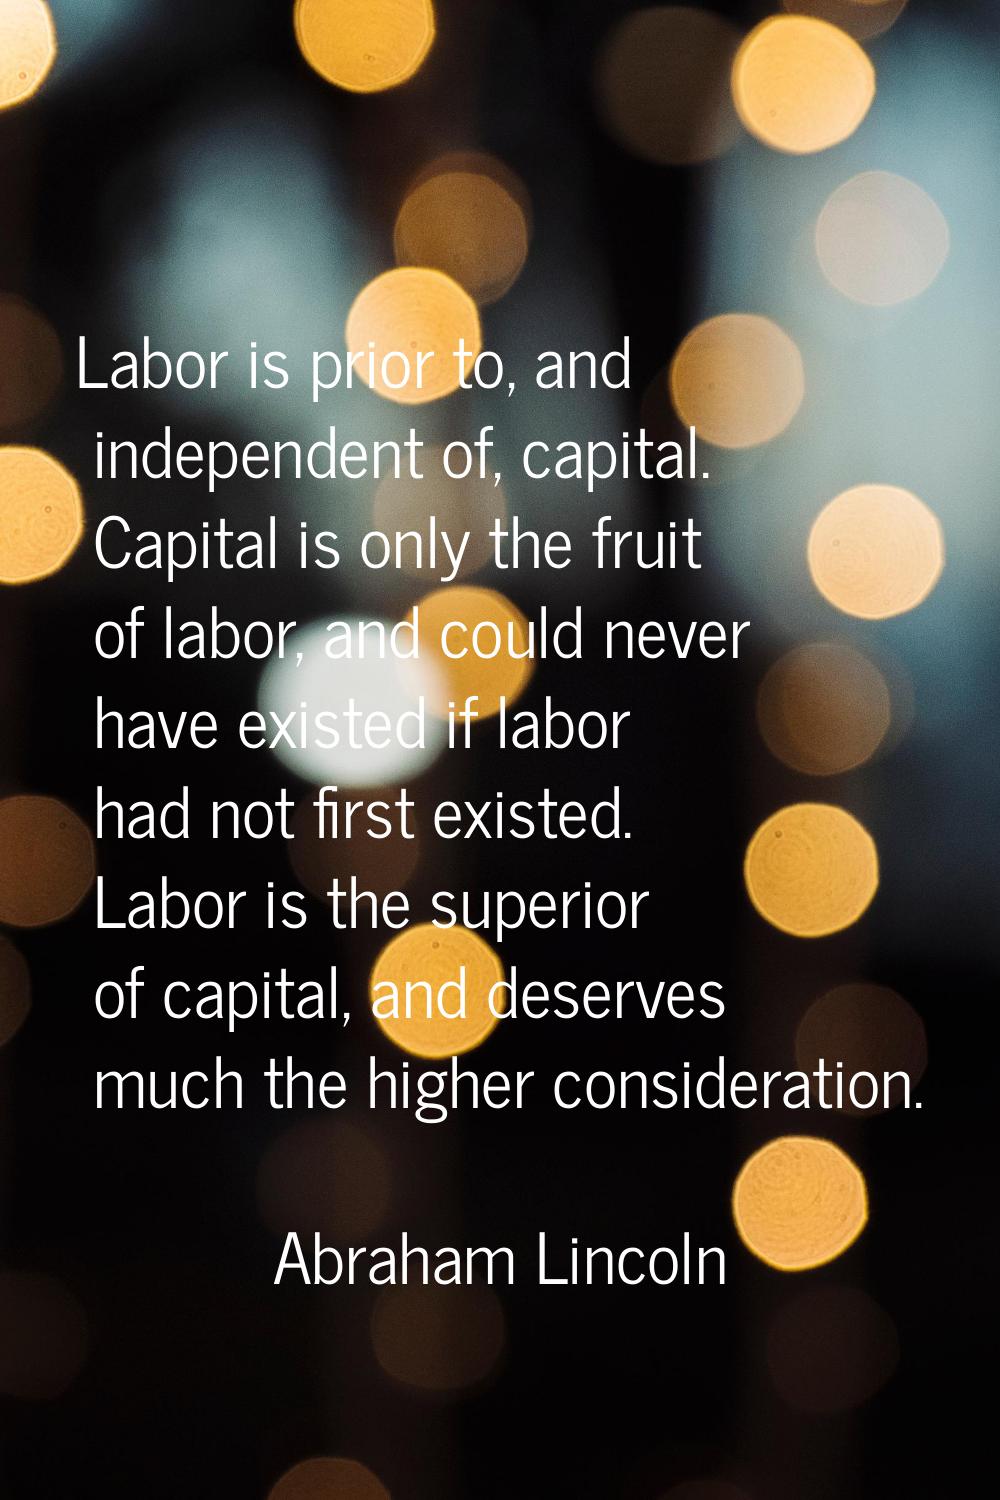 Labor is prior to, and independent of, capital. Capital is only the fruit of labor, and could never